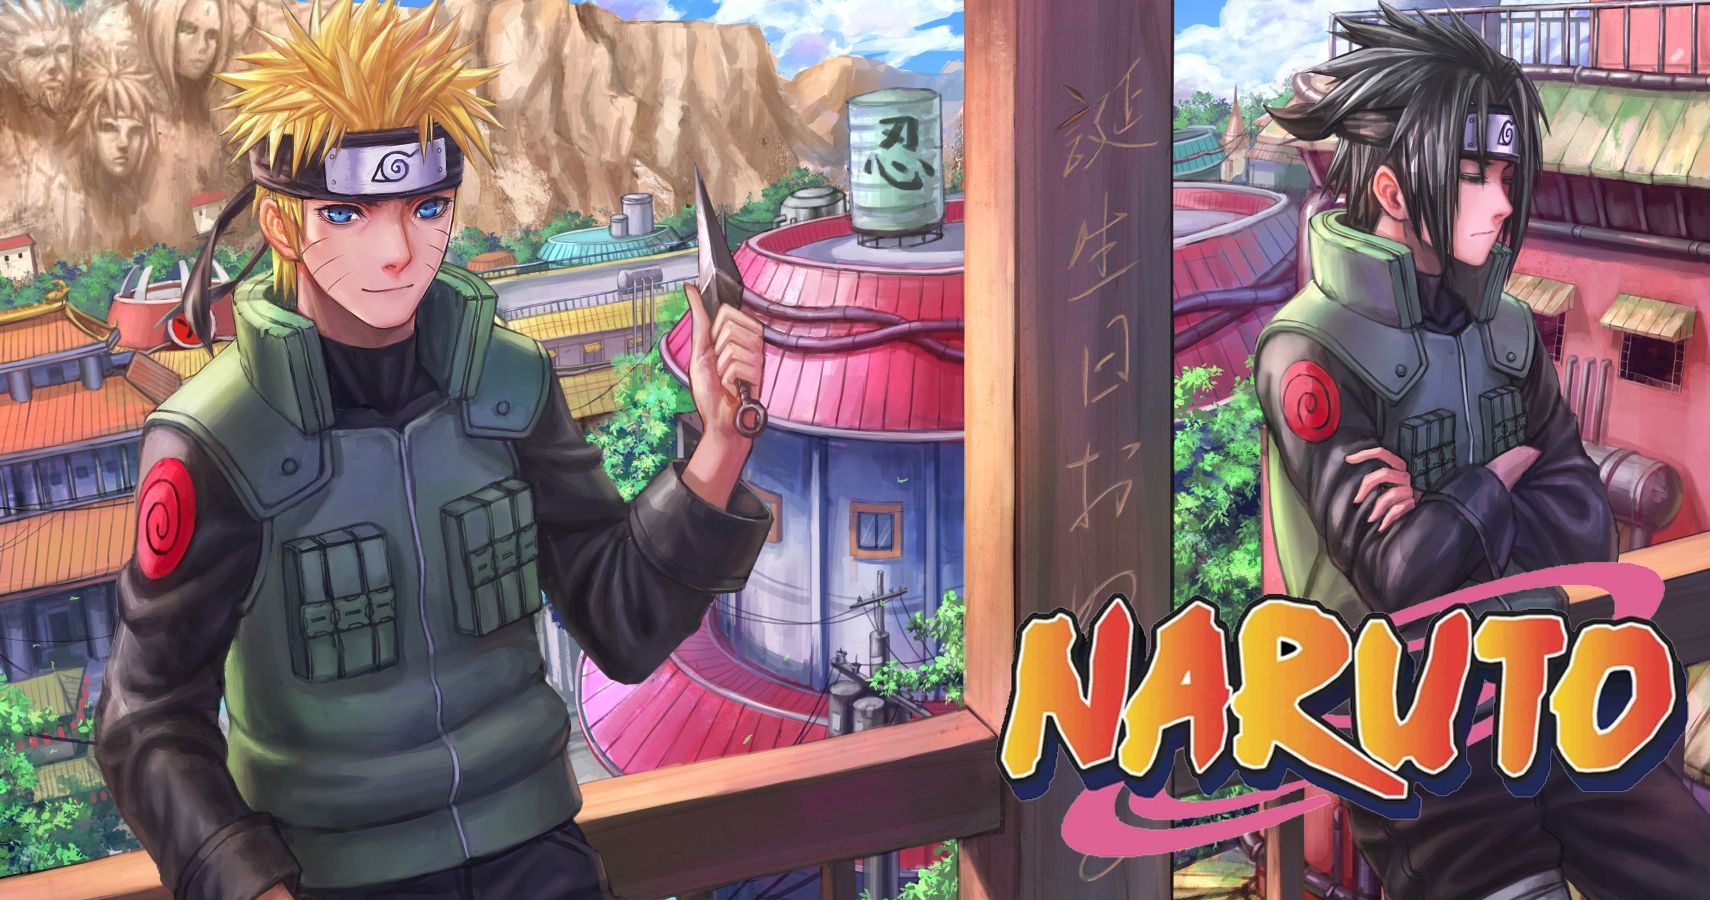 Naruto Might be One of the Least Impactful Characters in His Own